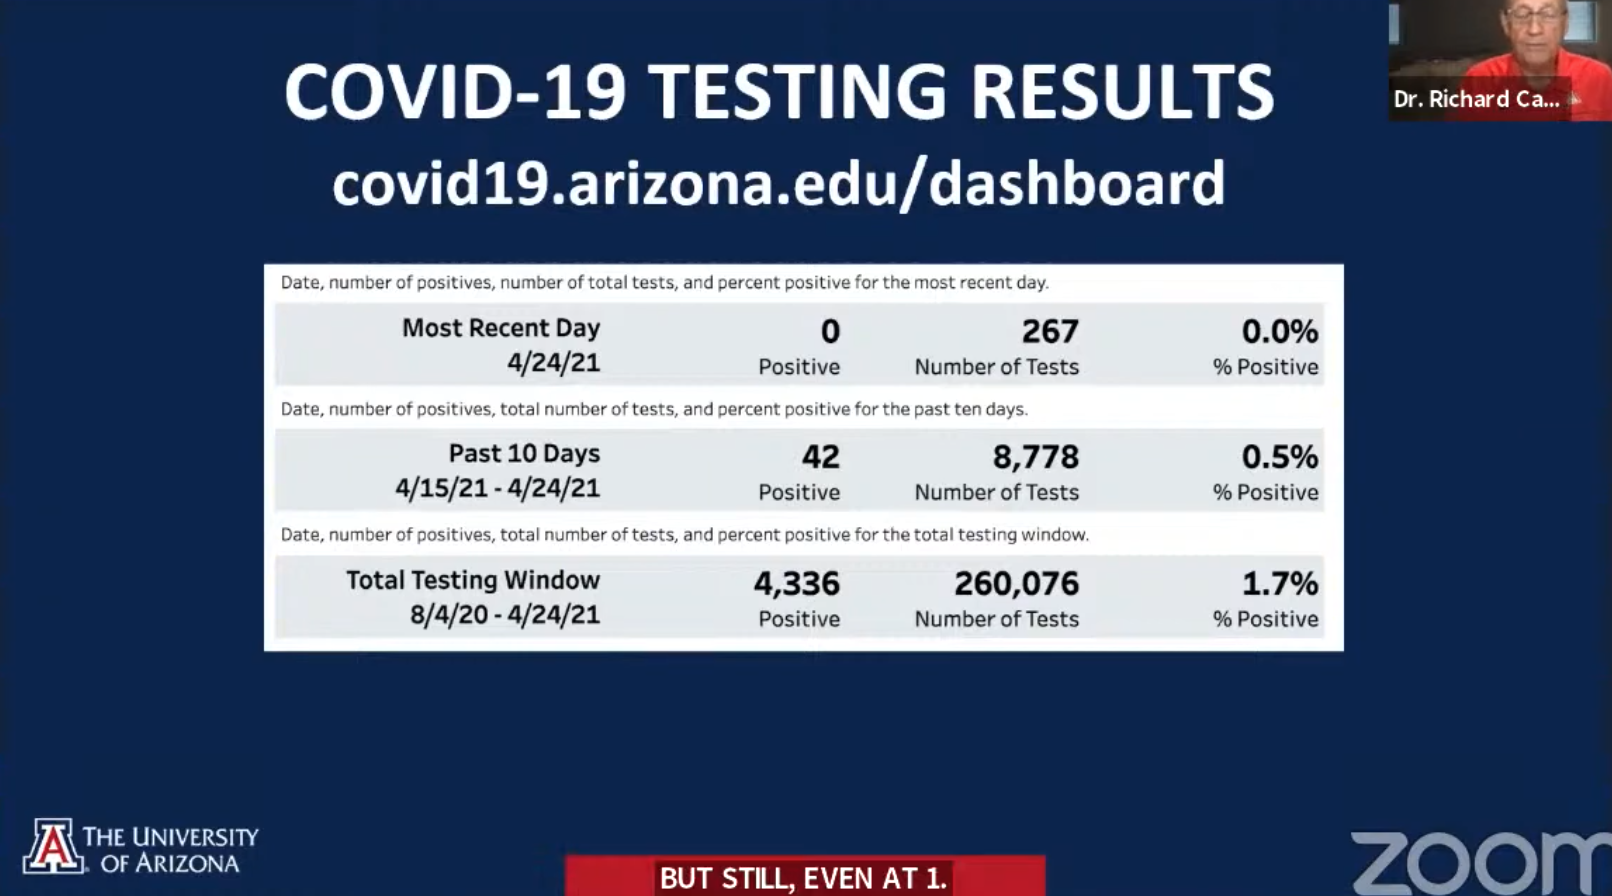 Screenshot of COVID-19 testing results from the University of Arizona, reflecting a 0.5% positivity rate out of over 8,000 tests conducted from April 15 to April 24.